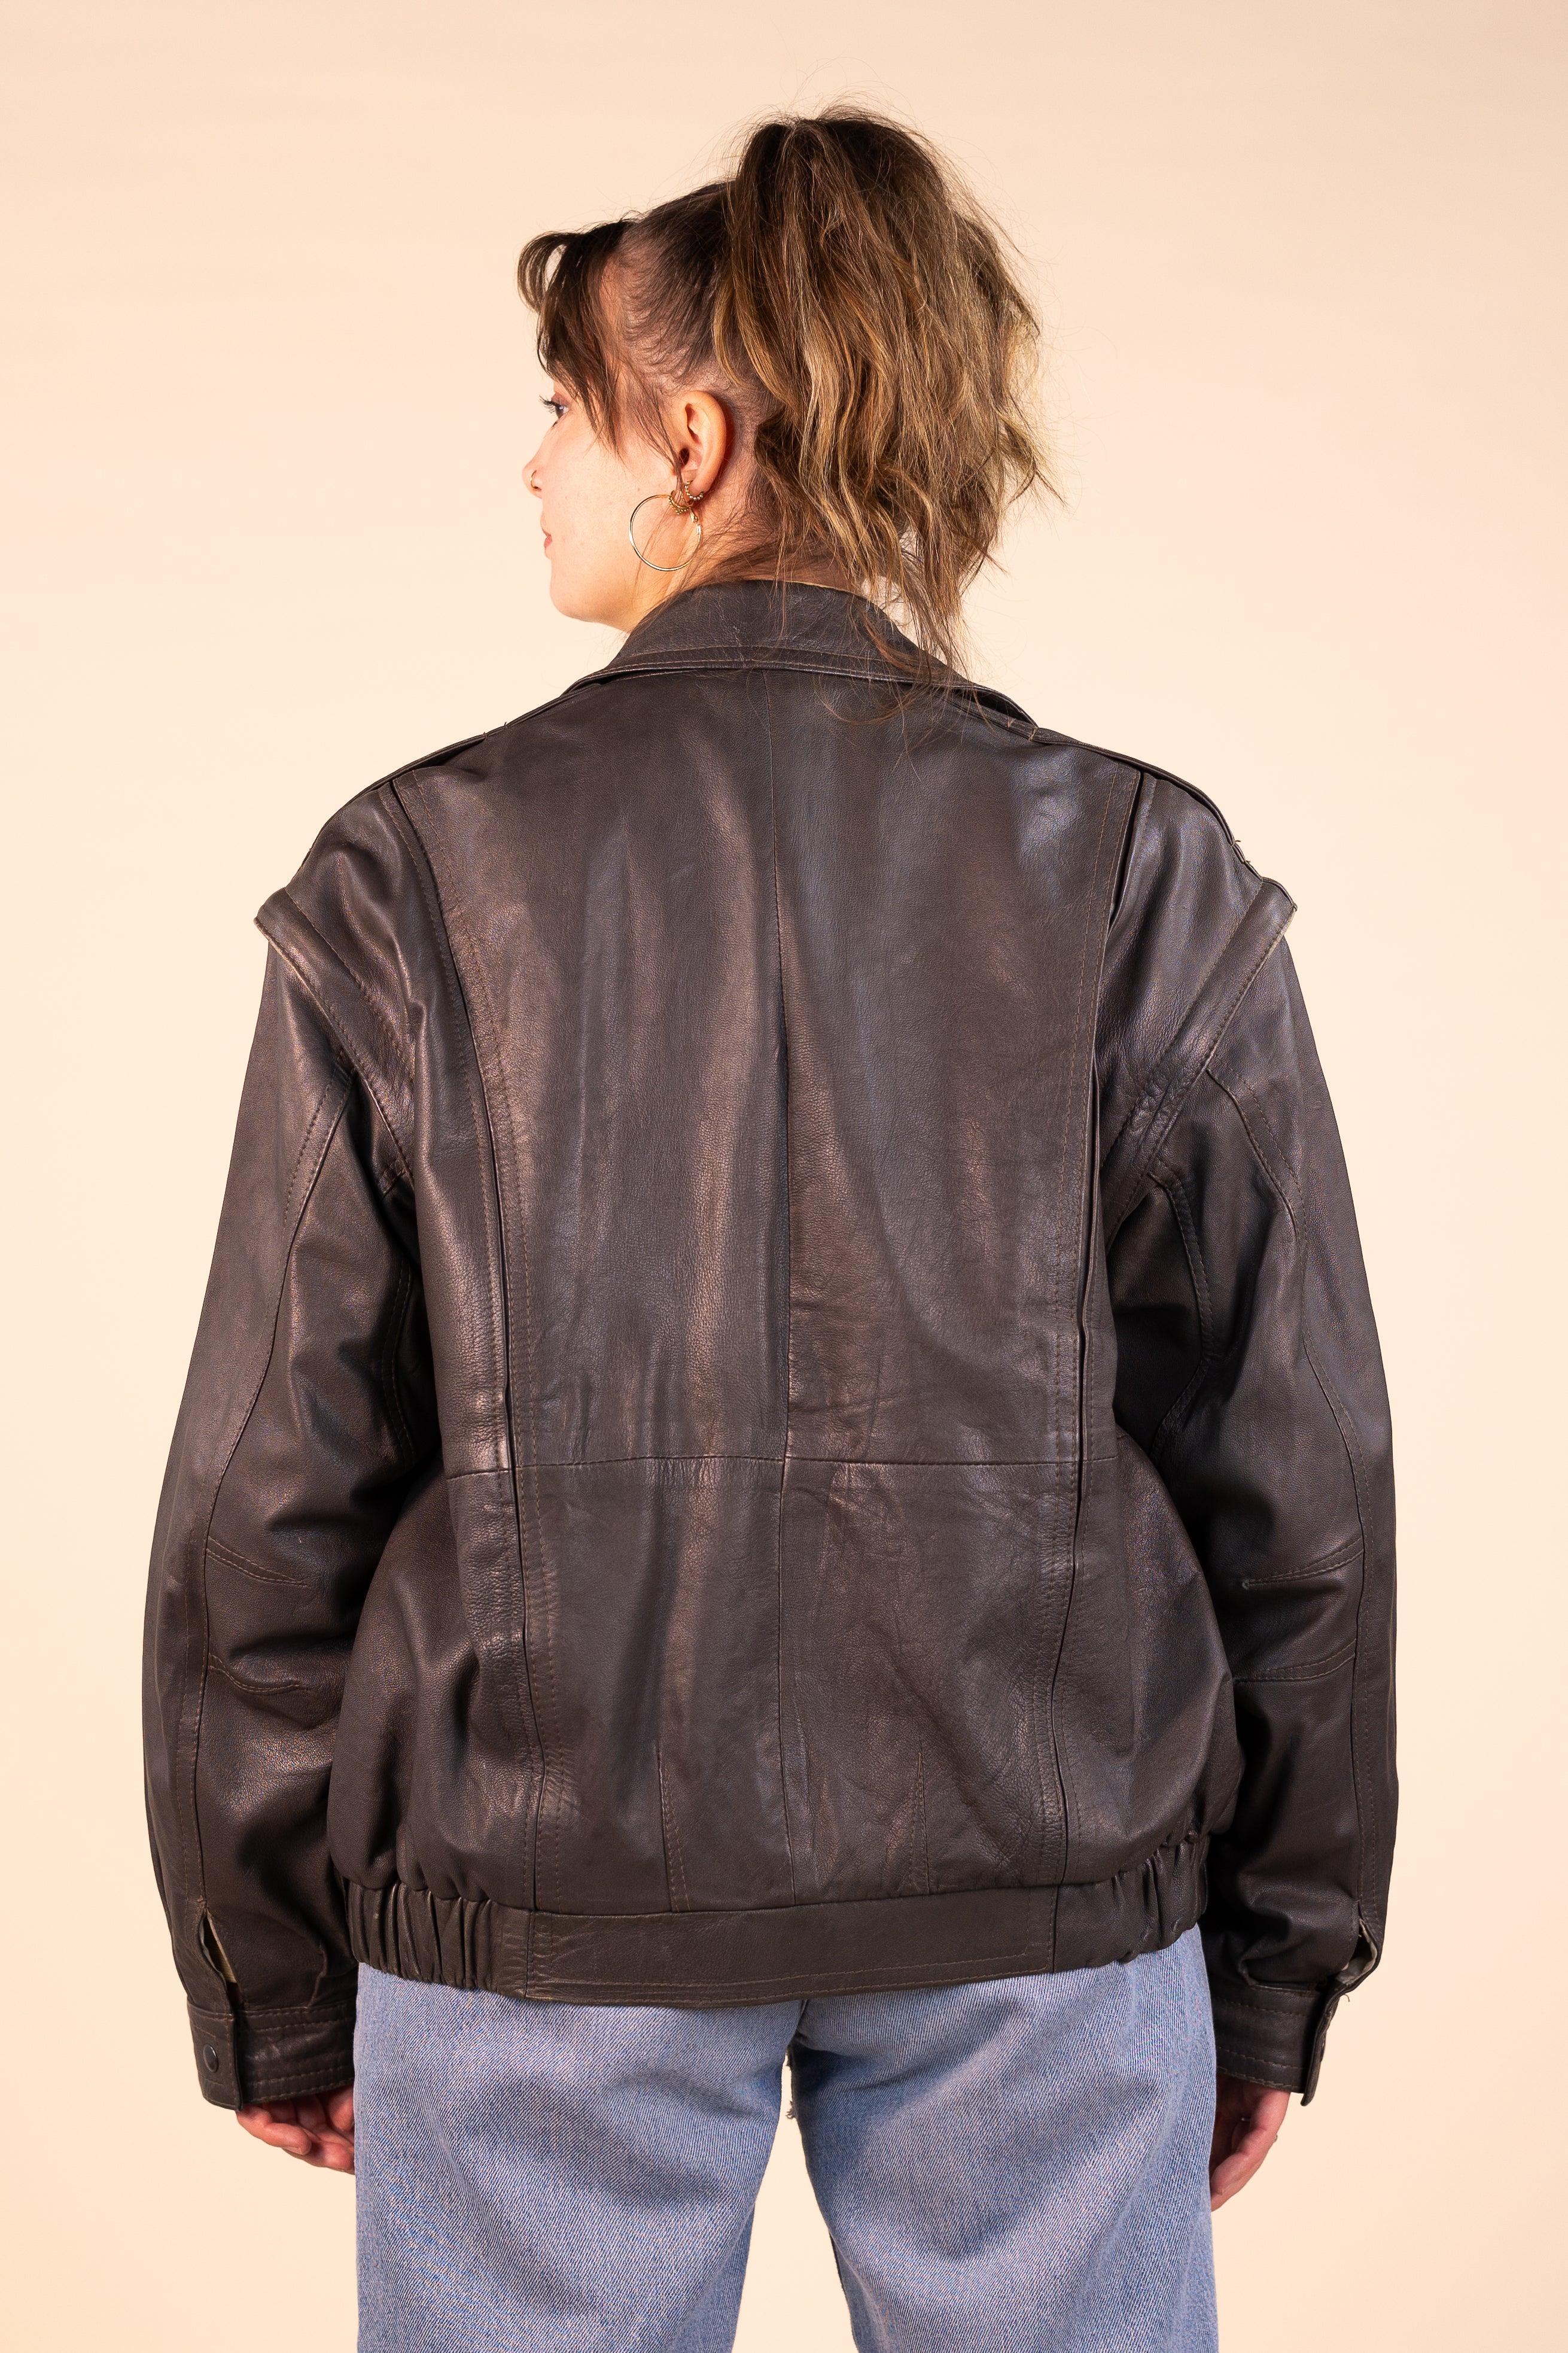 90s Leather Jacket with Removable Sleeves